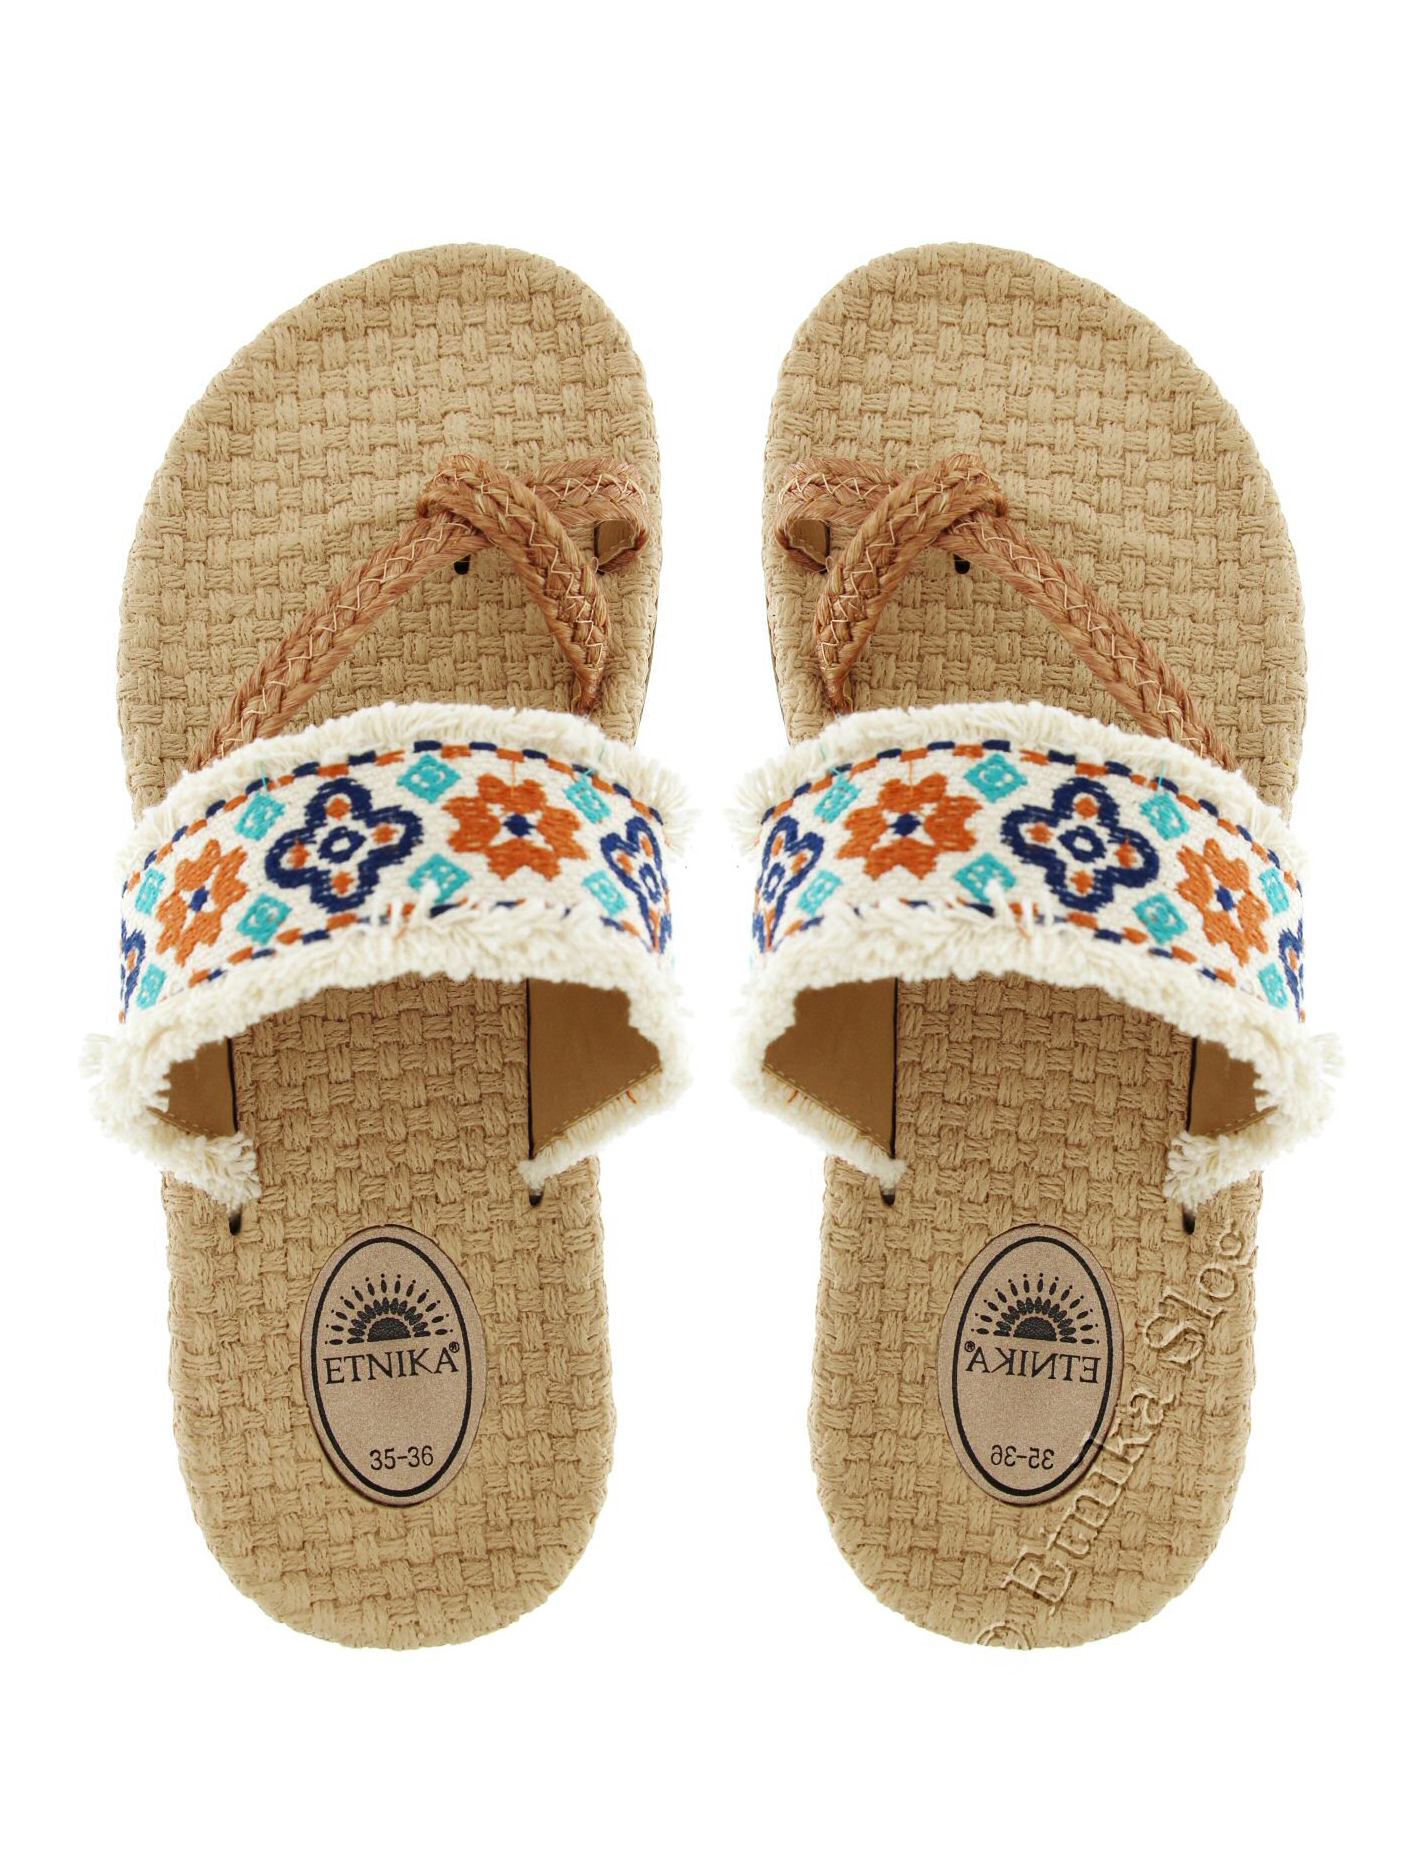 SANDALS AND MULES SN-THT17-02 - Oriente Import S.r.l.